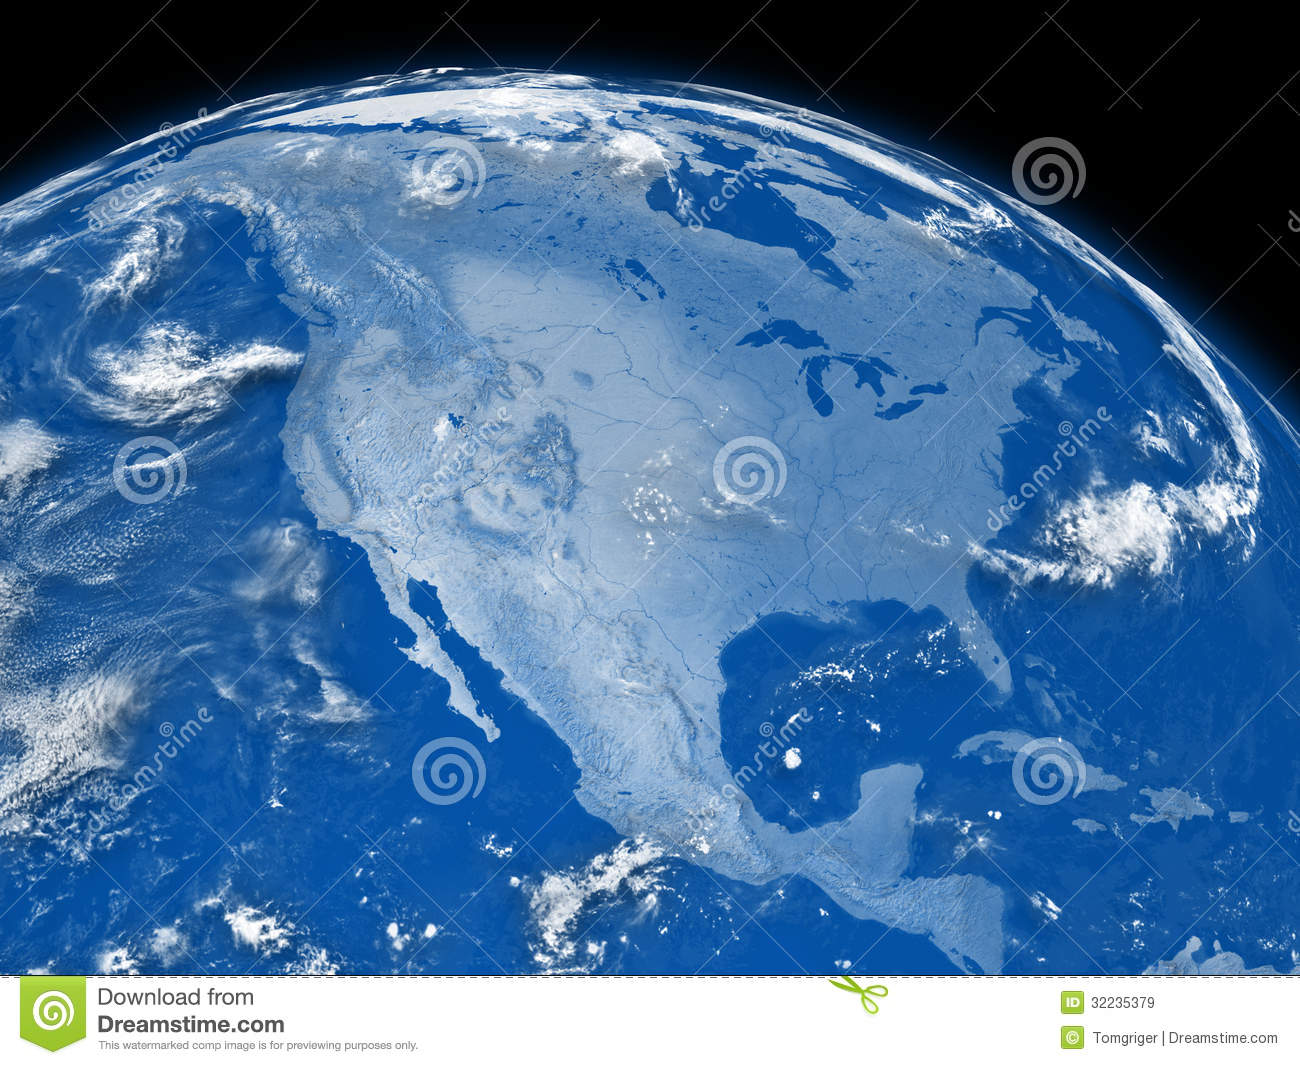 North America On Blue Planet Earth Isolated On Black Background